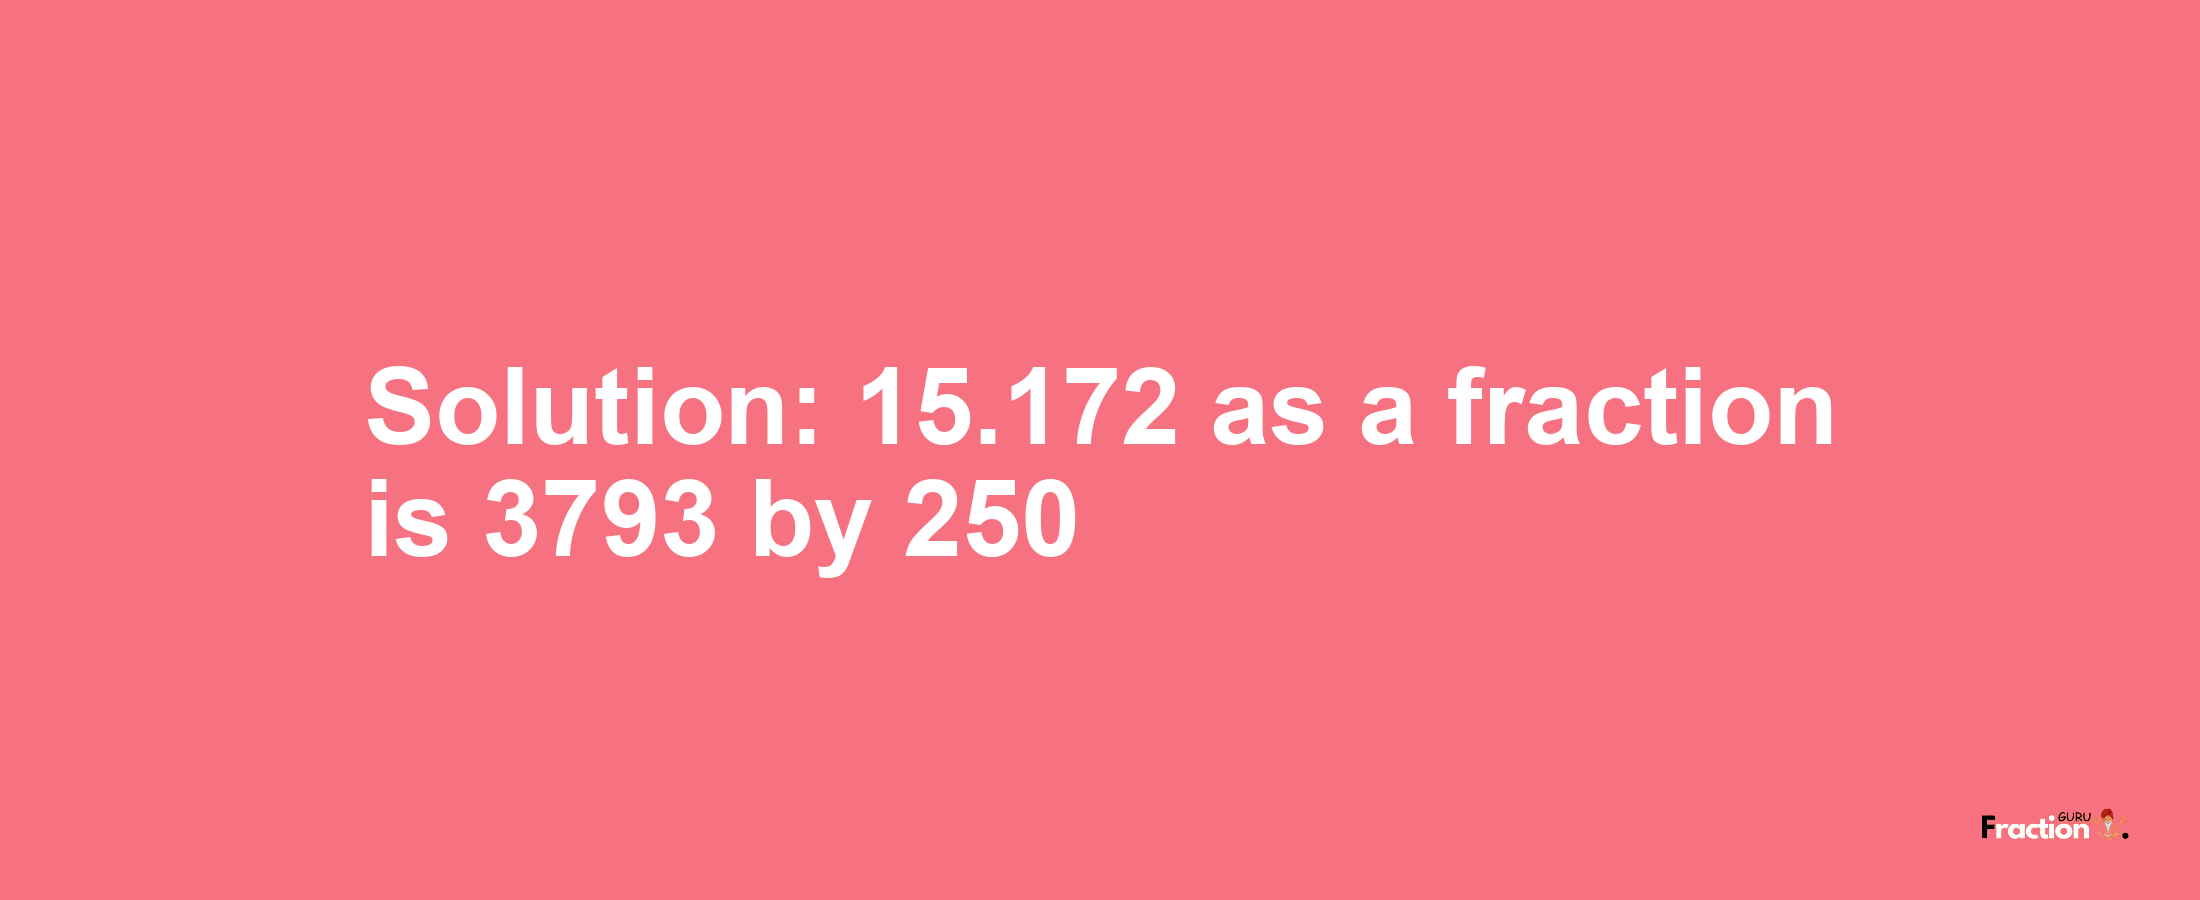 Solution:15.172 as a fraction is 3793/250